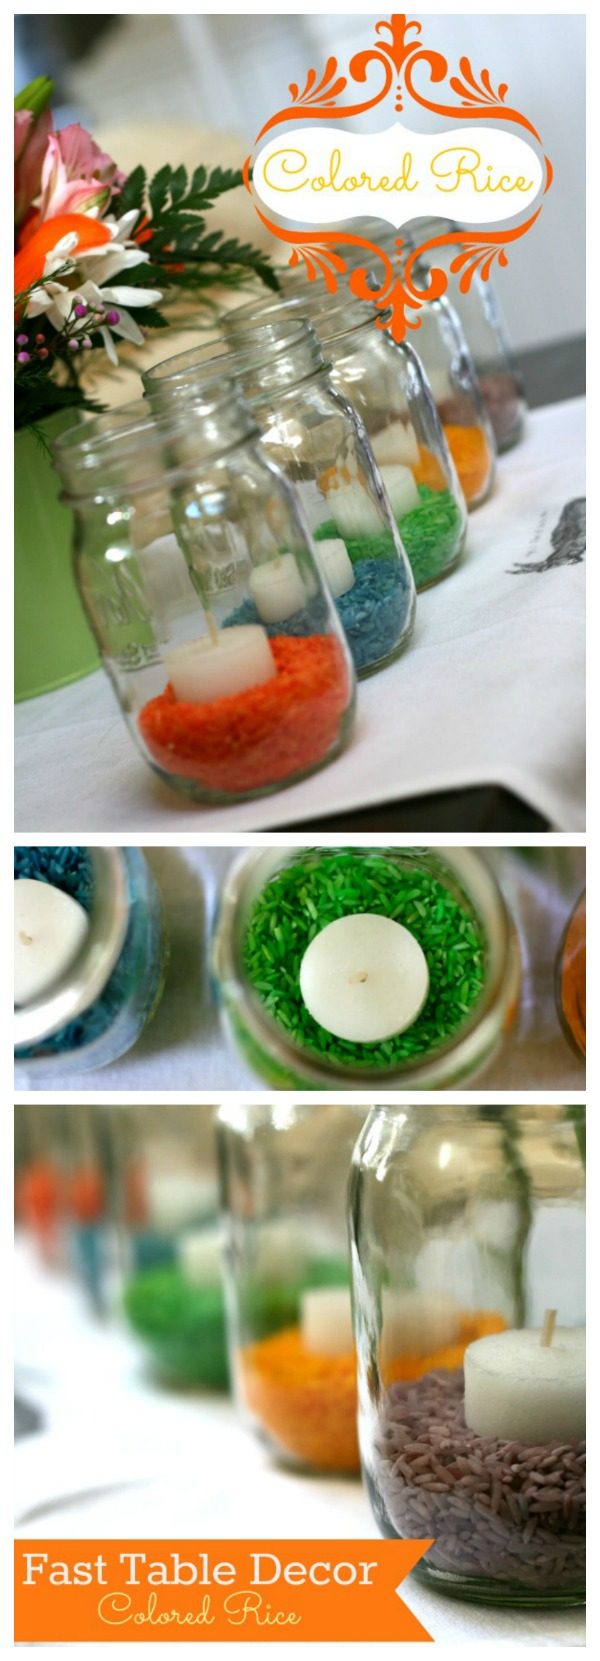 Colored Rice | Easter Table Decor using Mason jars and colored rice | How to color rice and create a quick table centerpiece for the holidays.